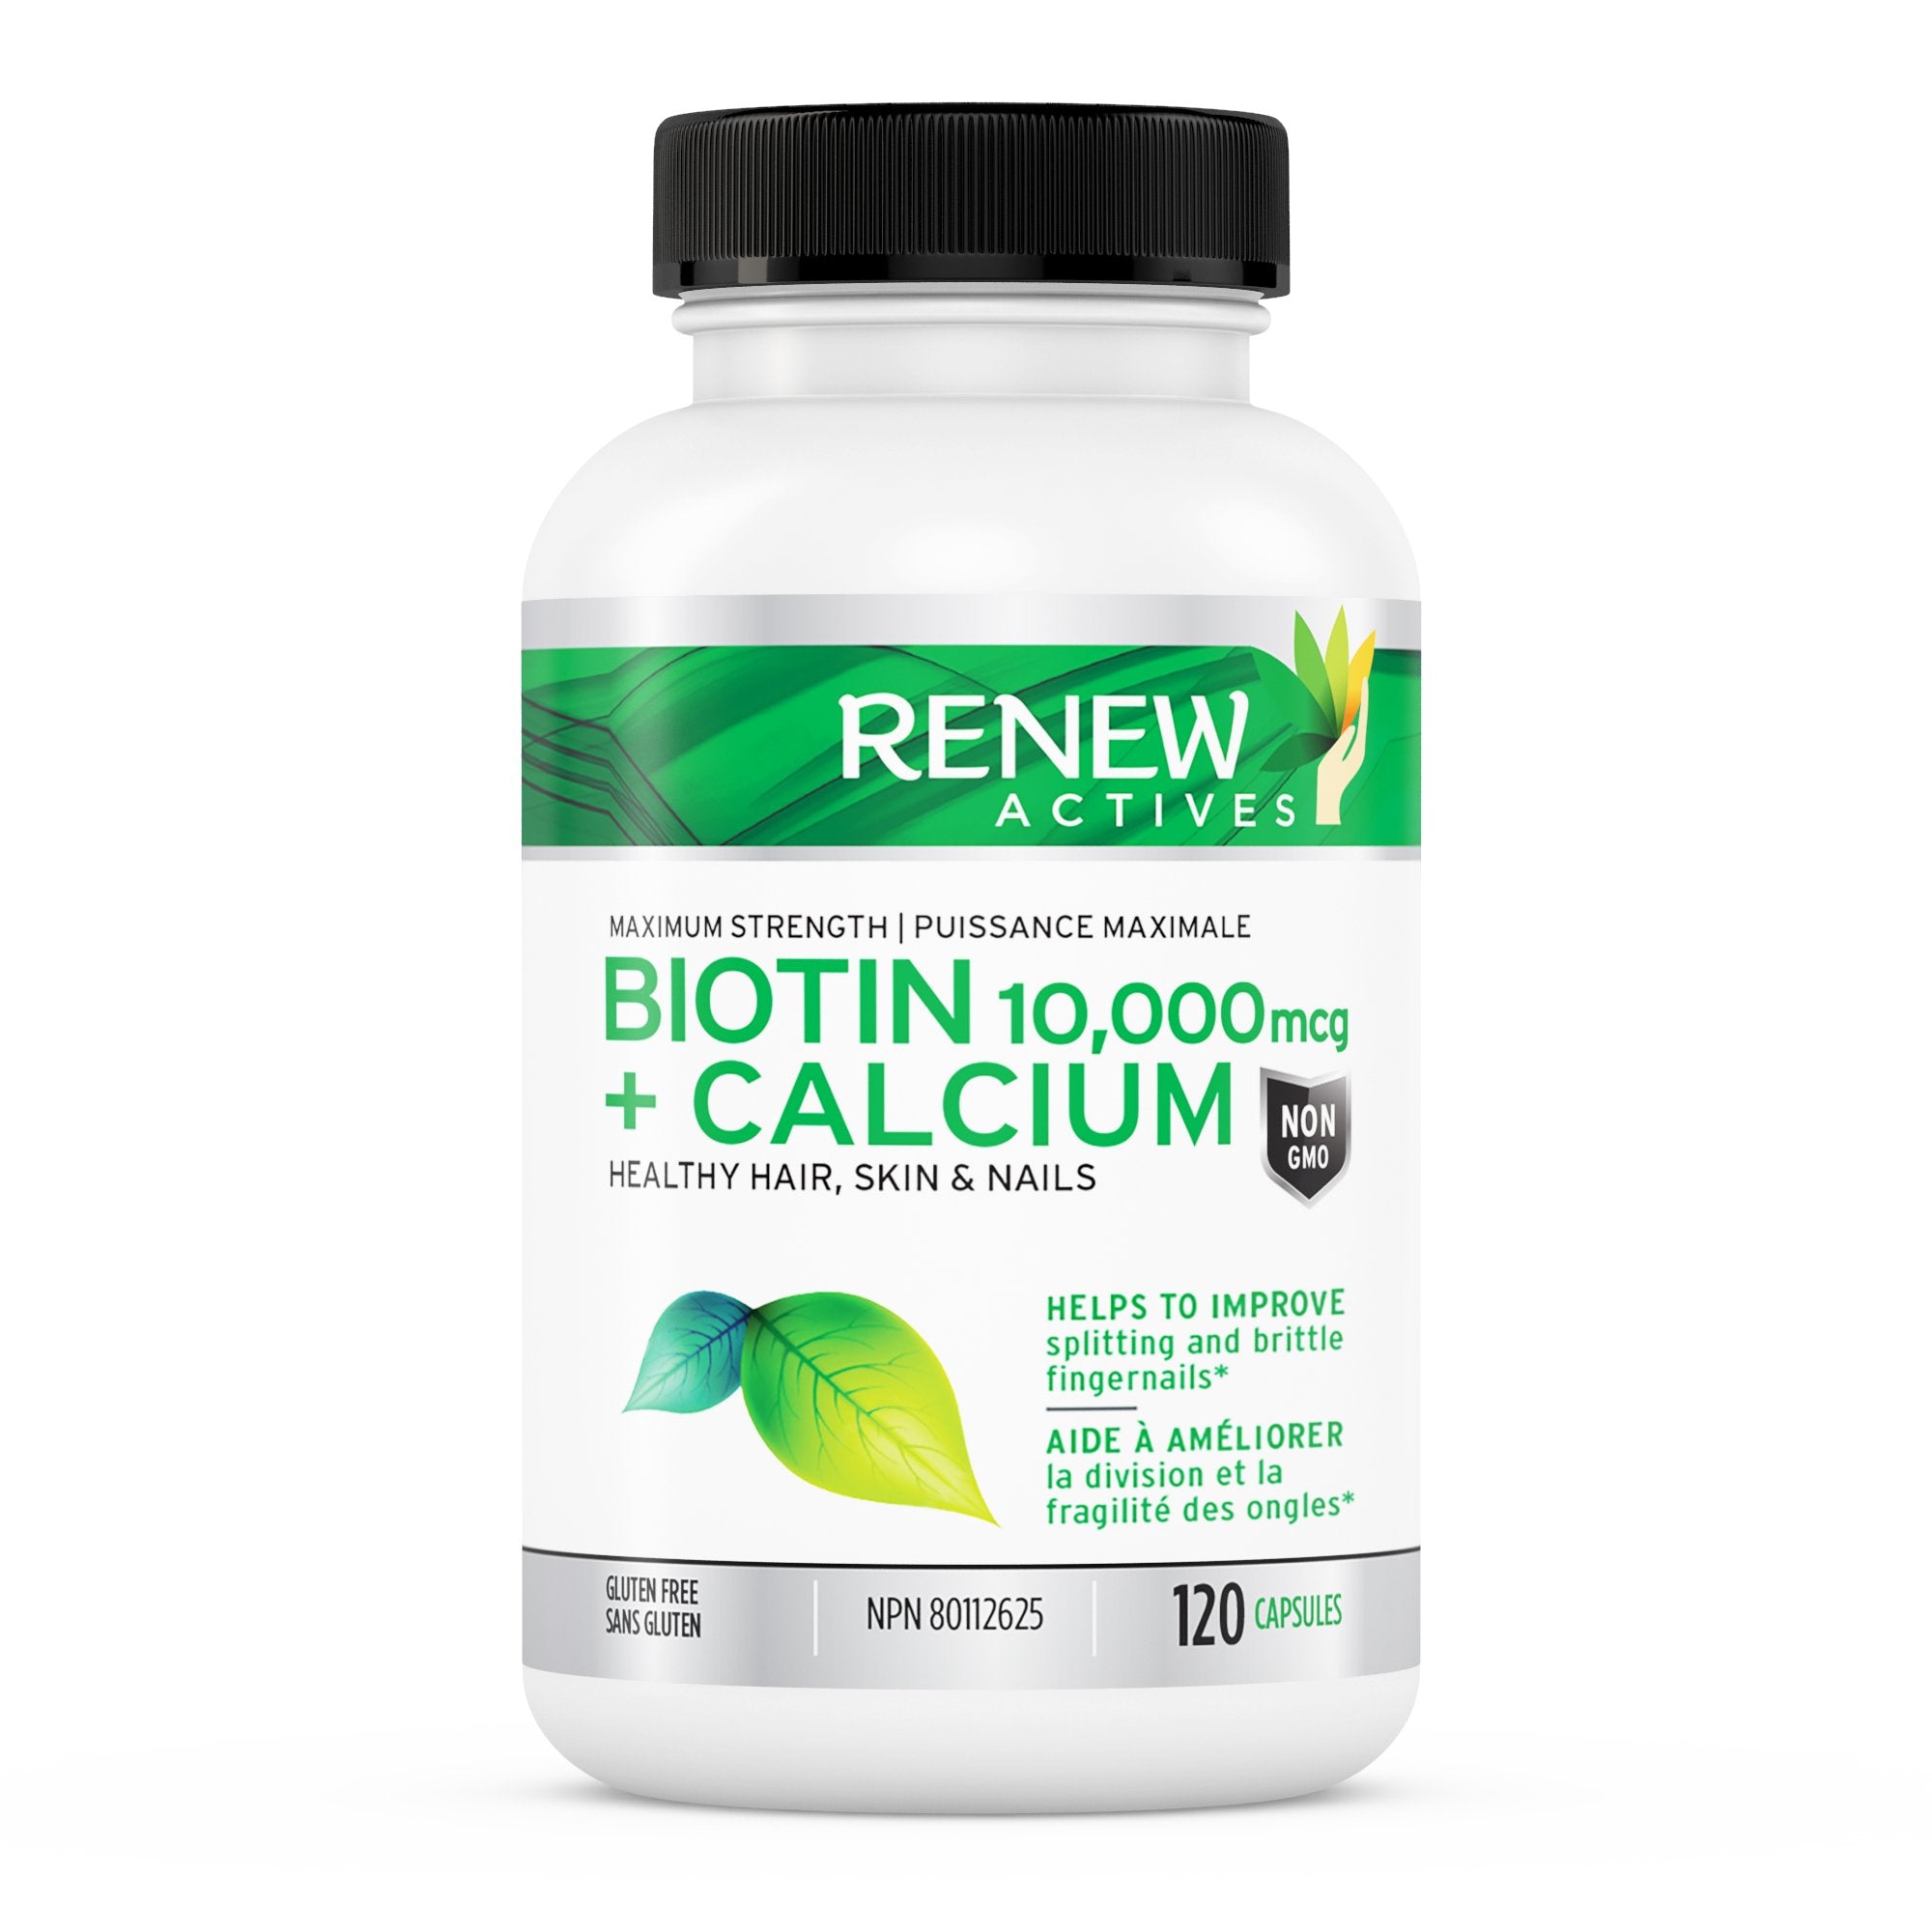 Renew Actives New Biotin & Calcium 10000mcg Supplement - for Healthy Hair Skin & Nails